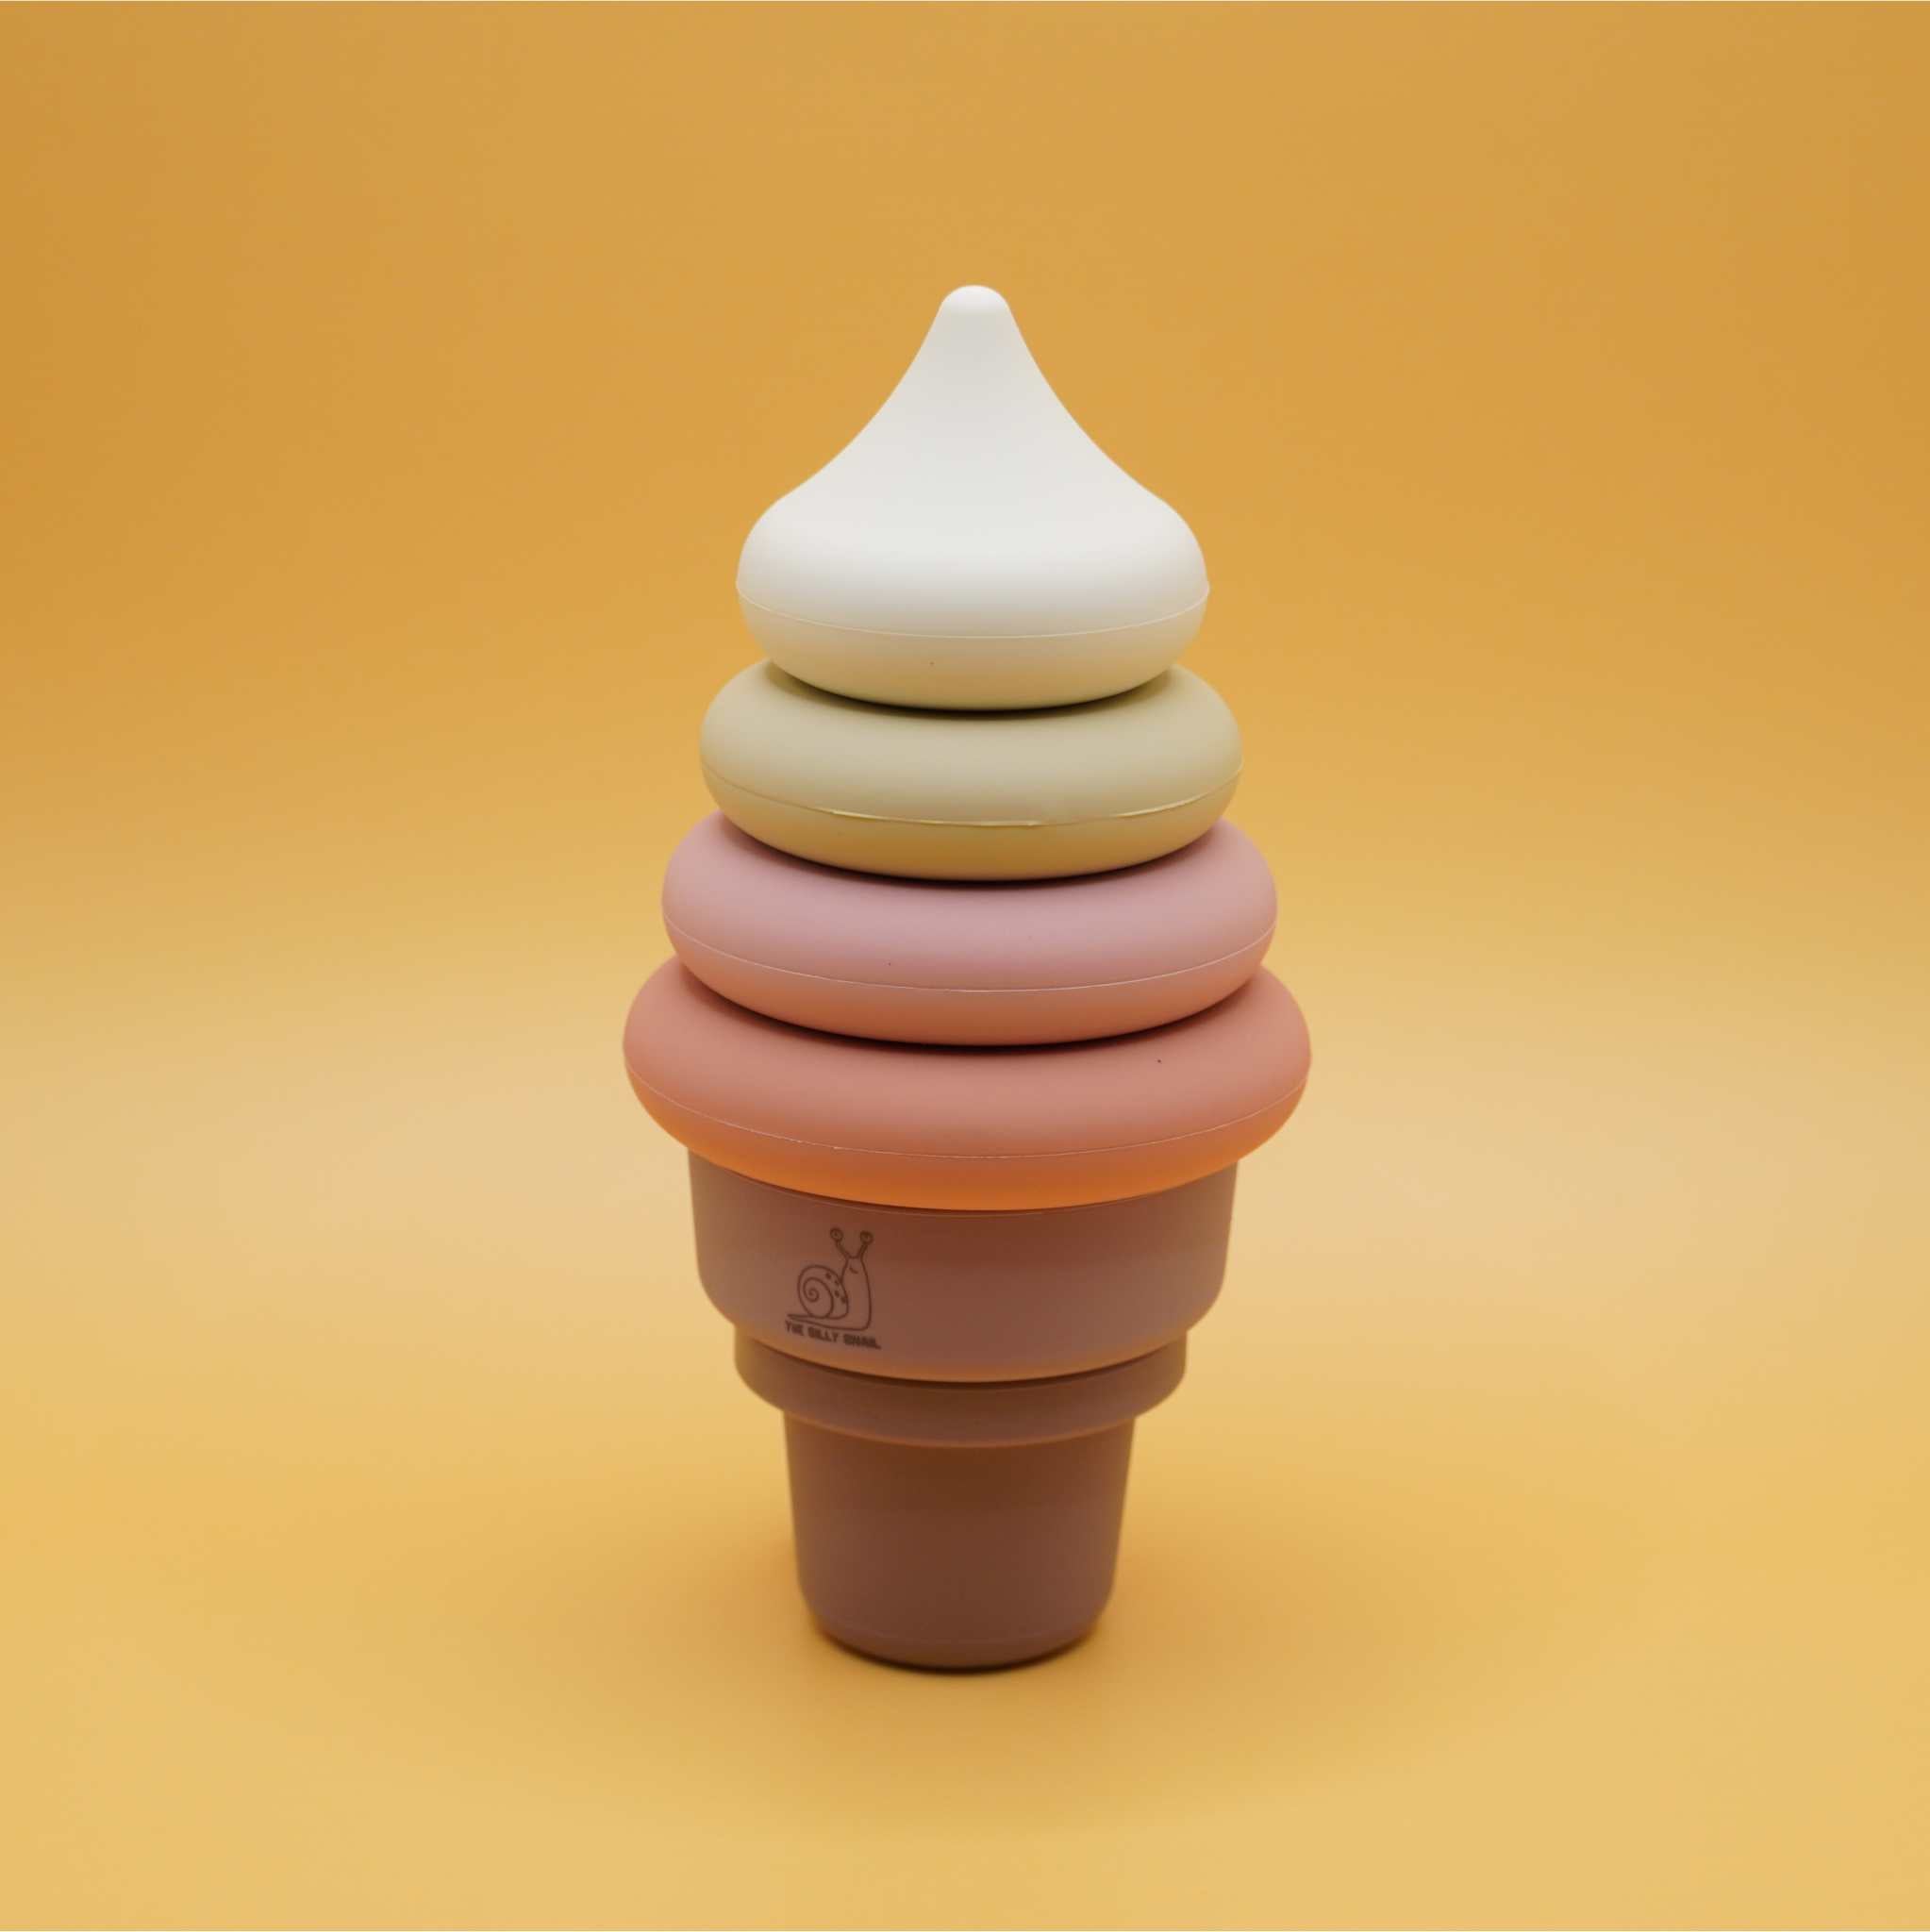 Irresistible Ice Cream Silicon stacking toy put together